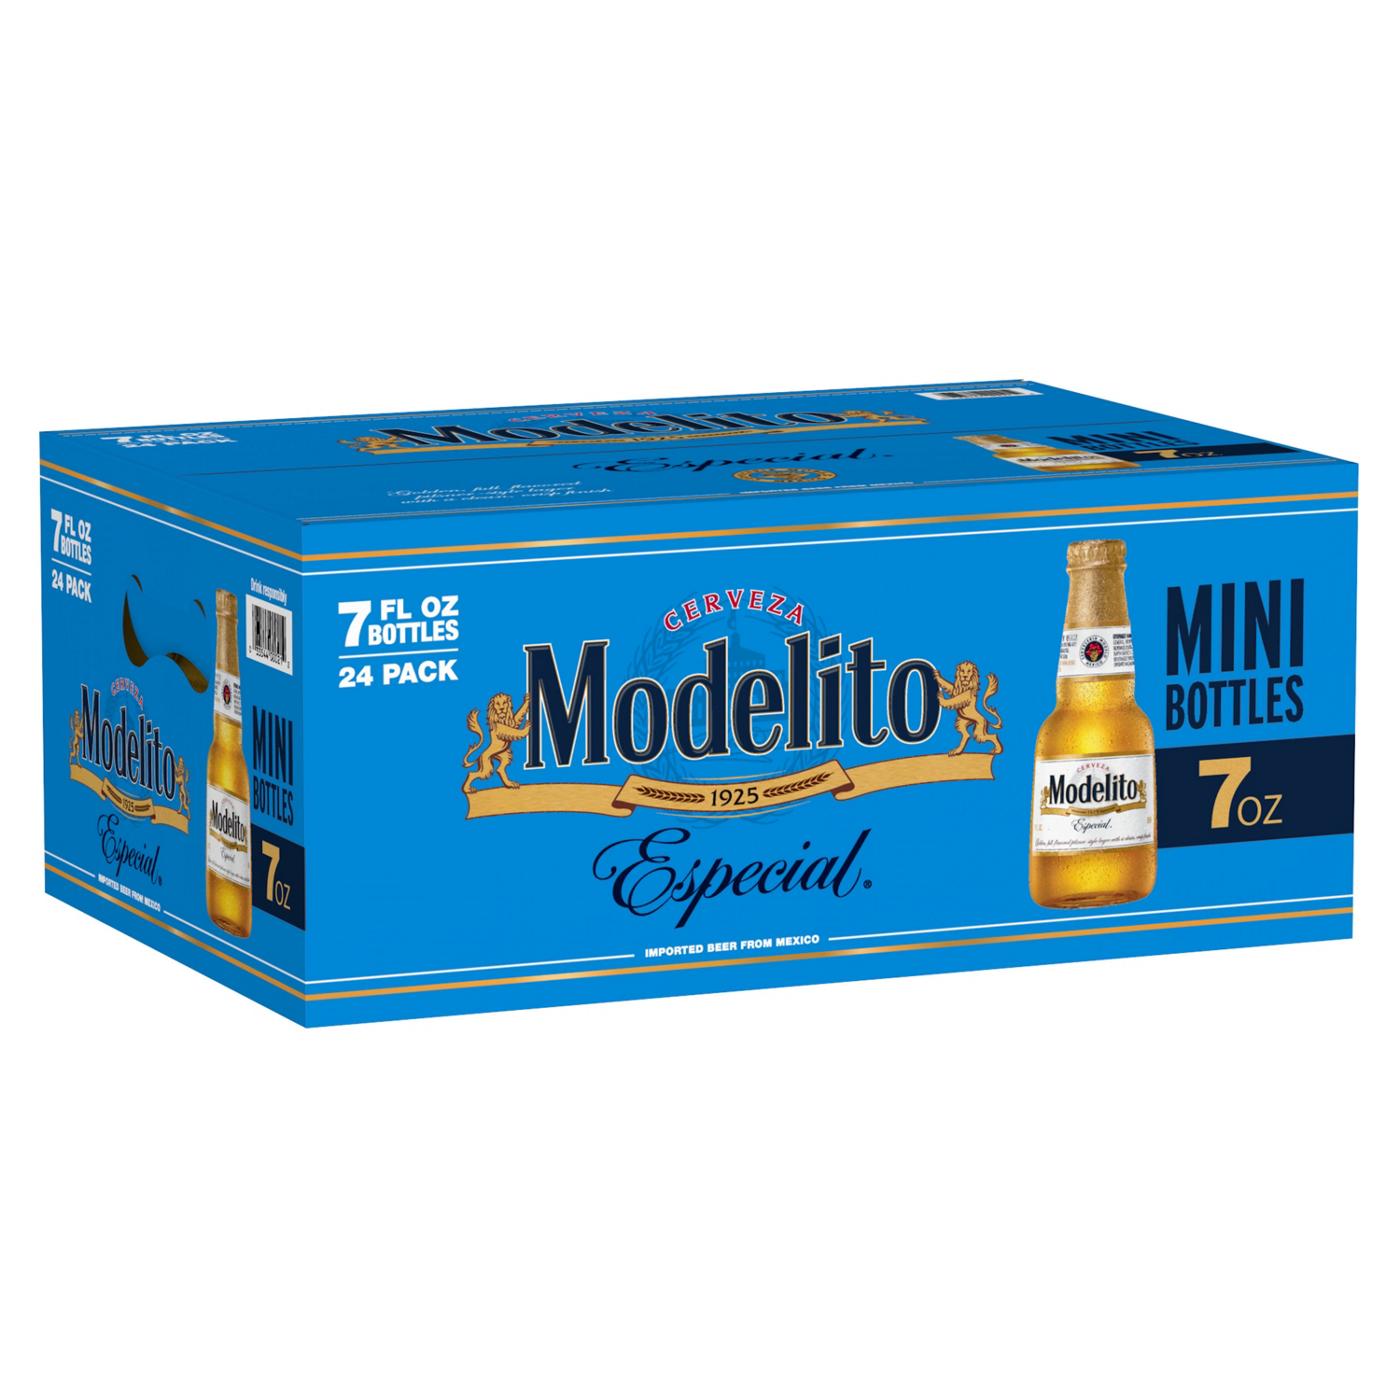 Modelo Especial Modelito Mexican Lager Import Beer 7 oz Bottles, 24 pk; image 1 of 11